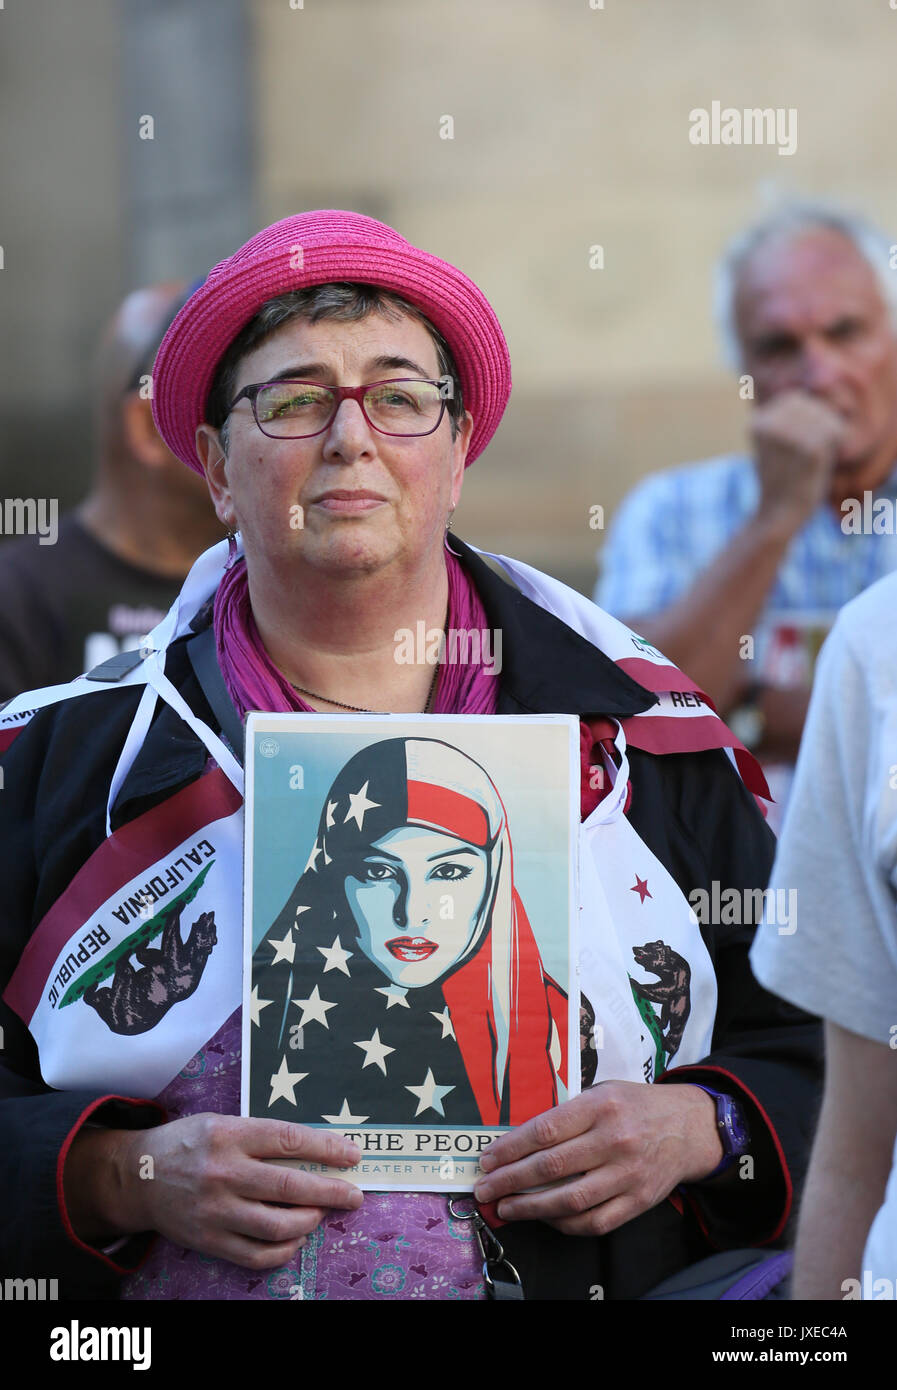 Manchester, UK. 15th Aug, 2017. An American woman joins a vigil for Heather Heyer who was killed in Charlottesville after a car crashed into demonstrators protesting a white supremacy rally, St Peters Square, Manchester, 15th August, 2017 Credit: Barbara Cook/Alamy Live News Stock Photo